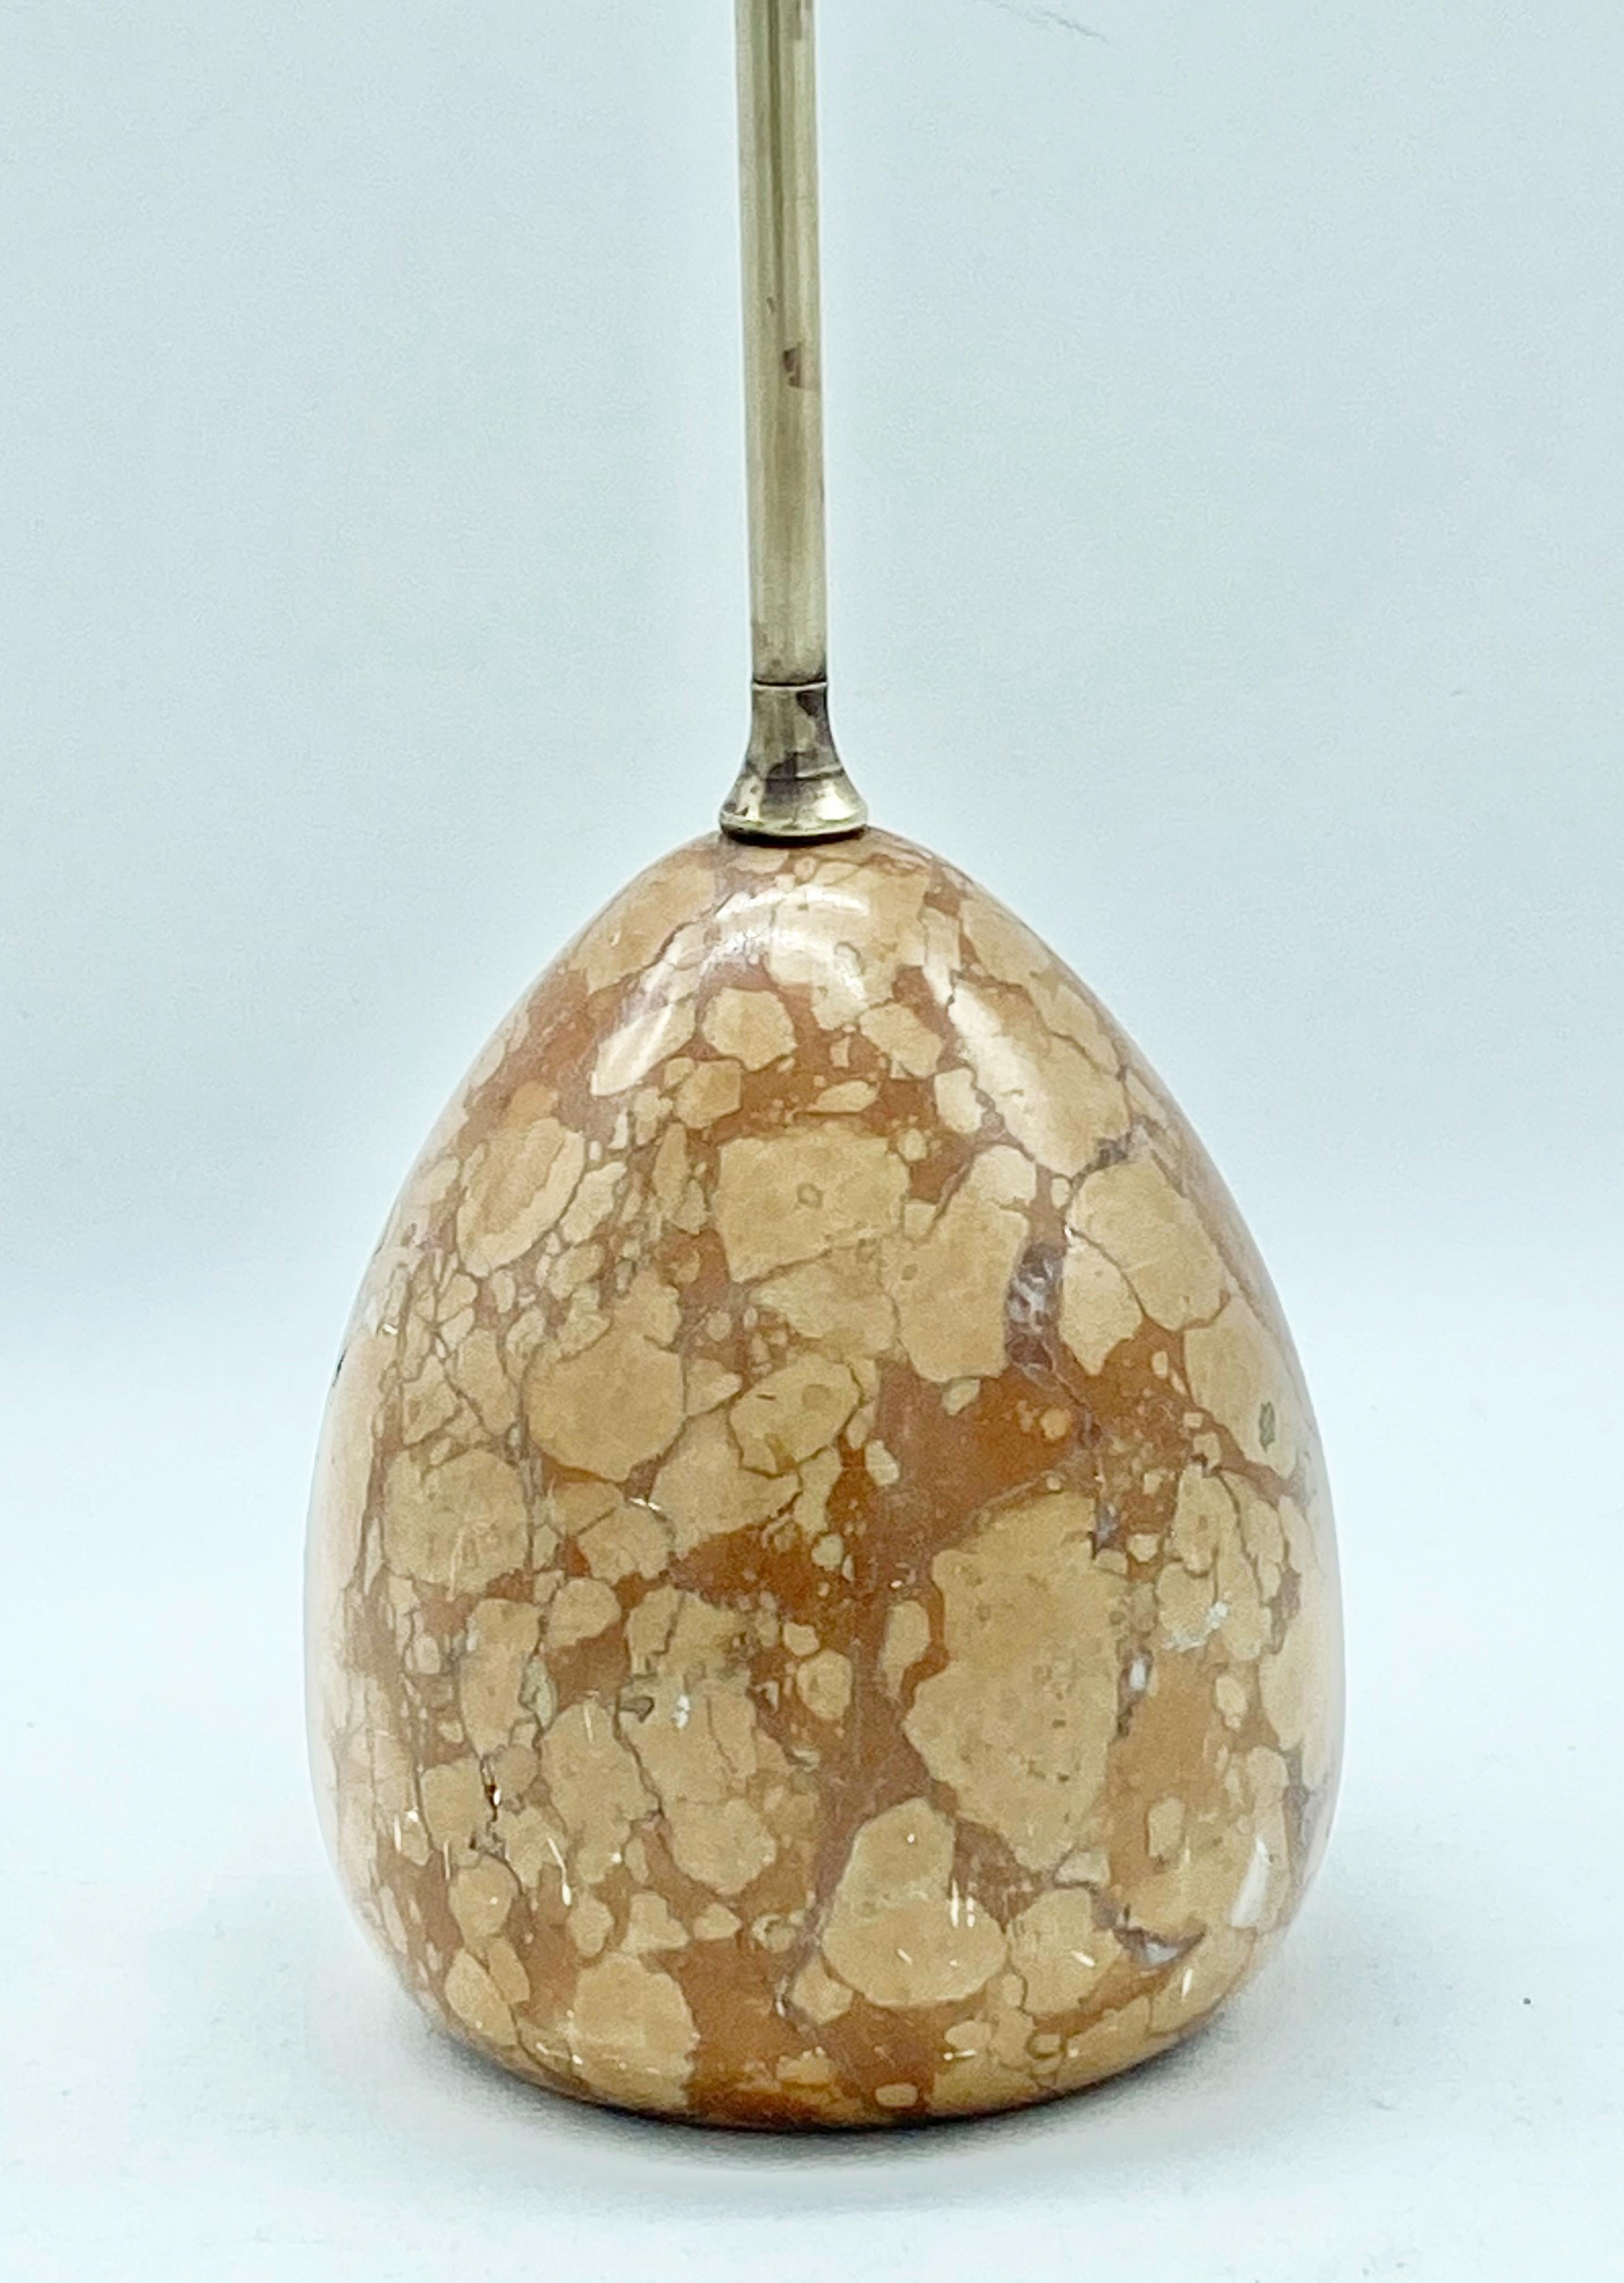 Italian modern doorstop produced in the 1960s by Luigi Caccia Dominioni made for Azucena Milano
In red Verona marble and brass
Architectural object
Sculptural
Nautical.
  